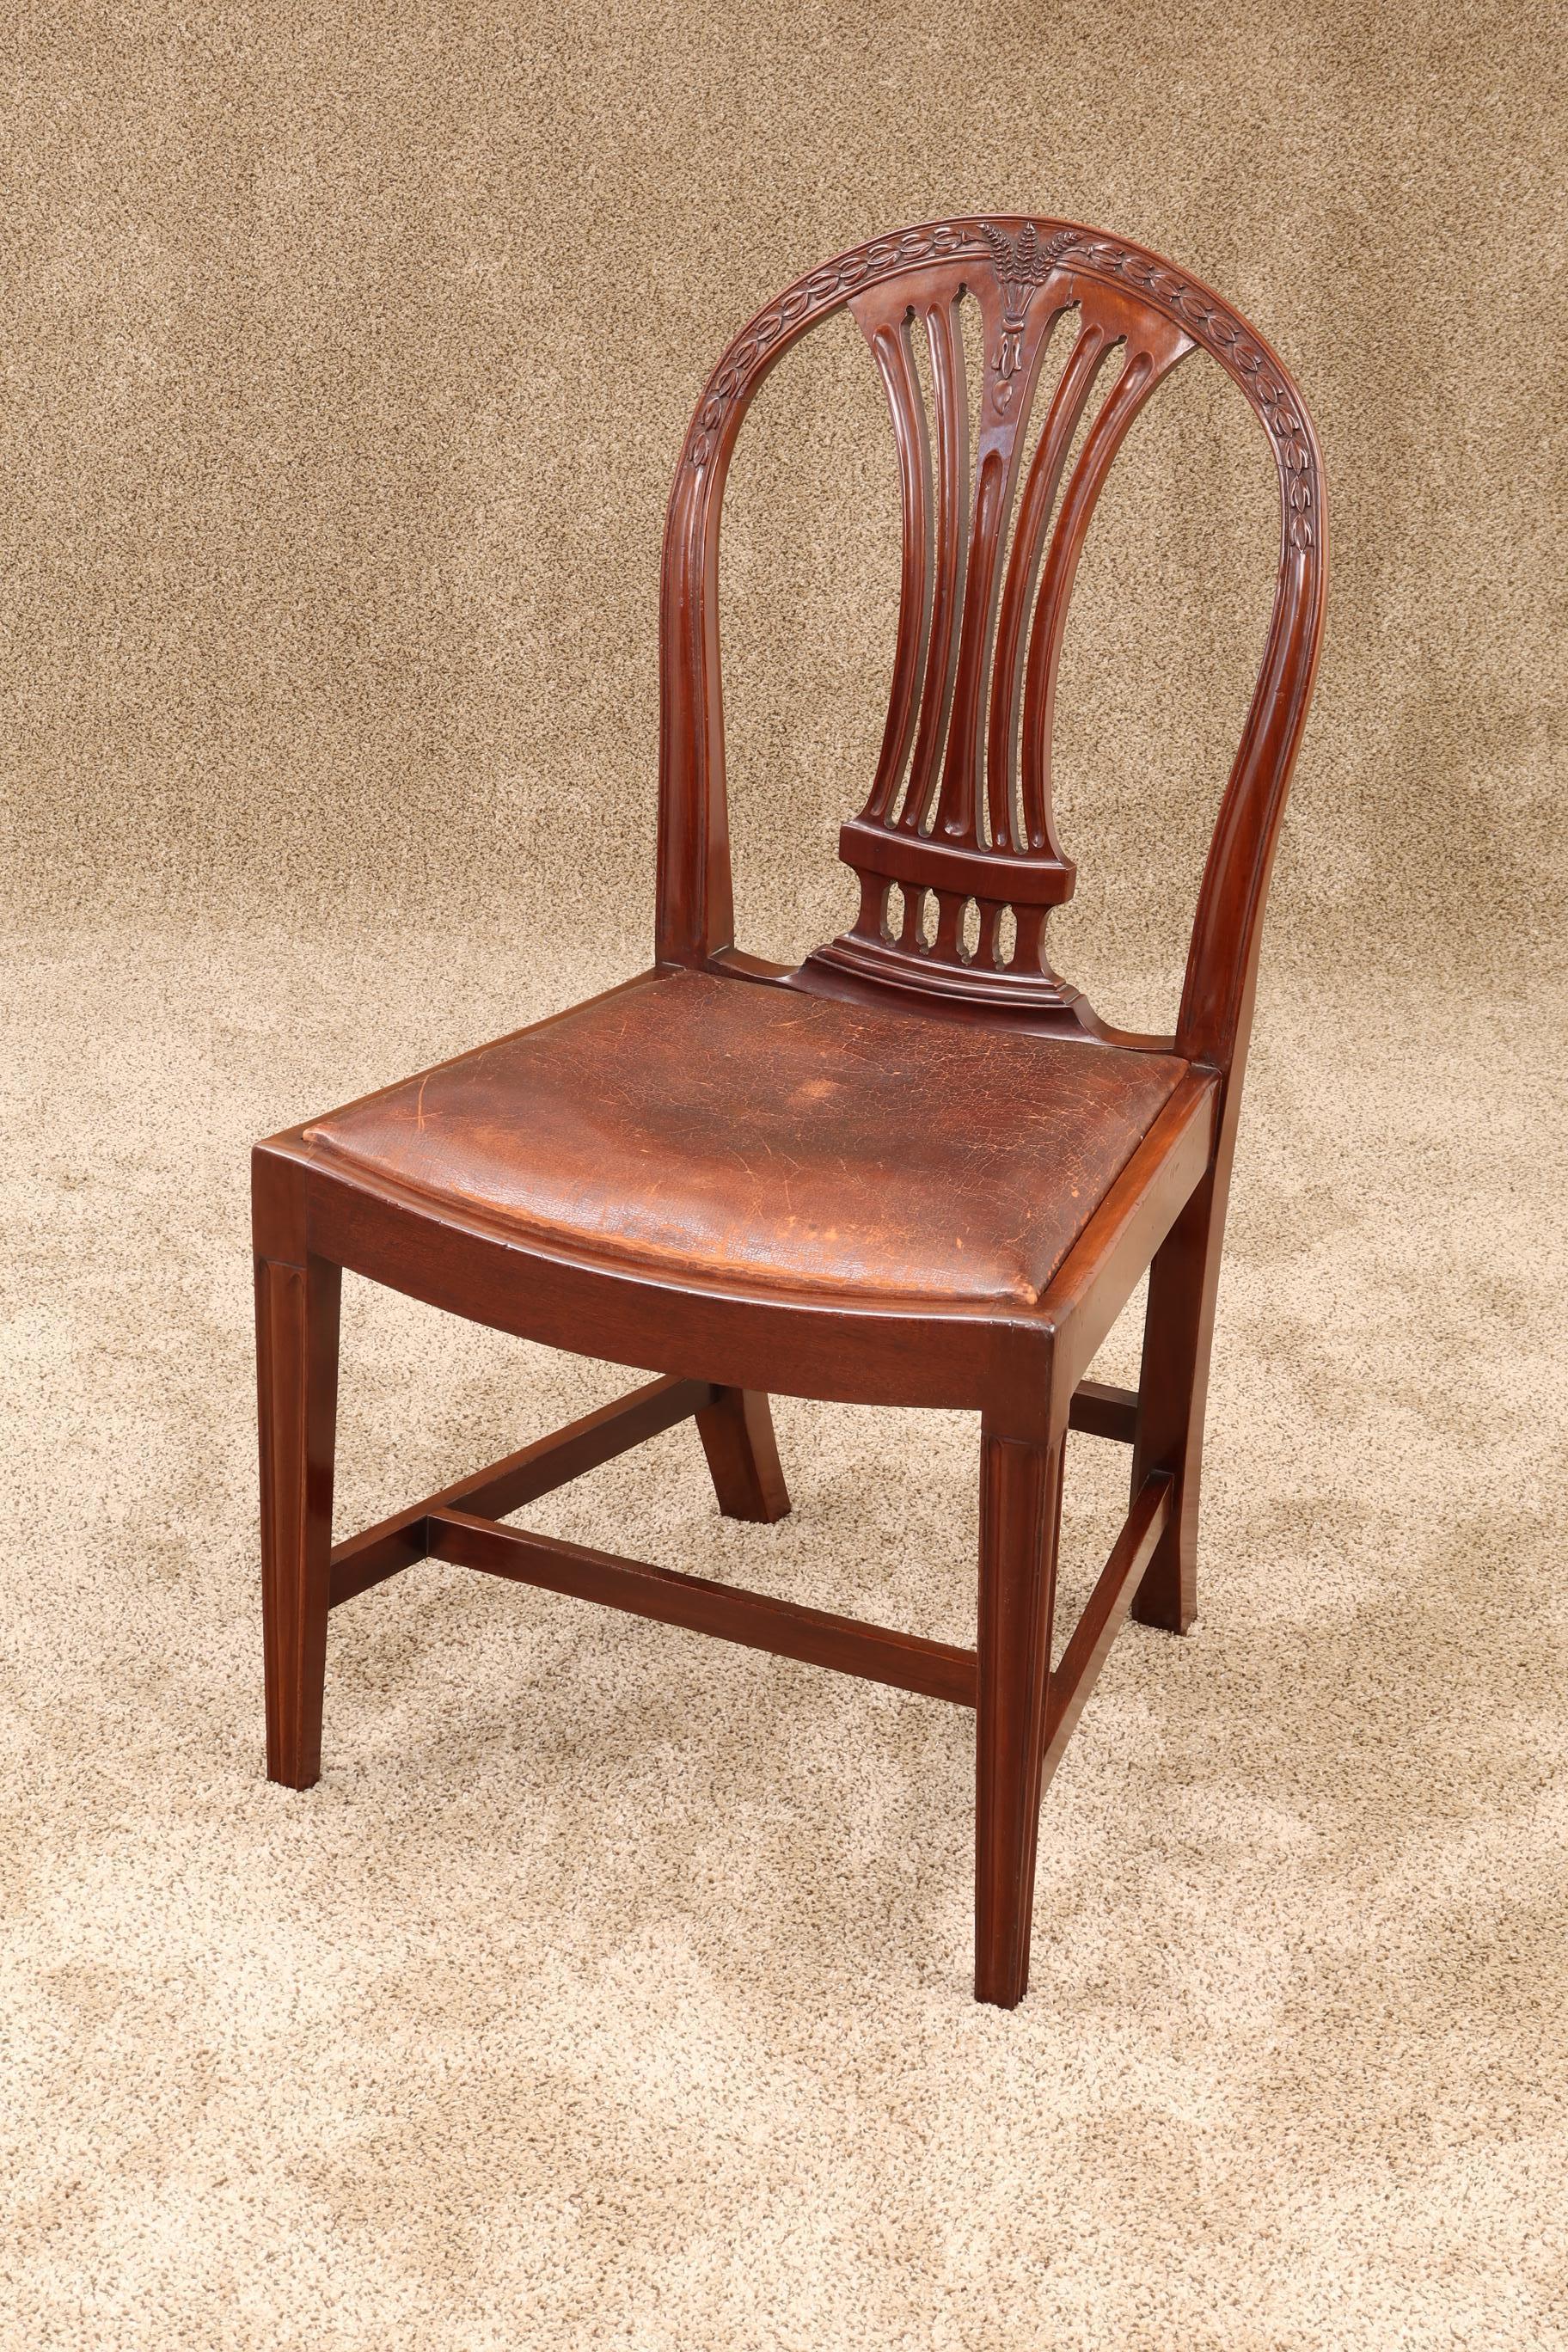 Exceptional Set of 8 English Hepplewhite Style Dining Chairs, circa 1880 For Sale 3